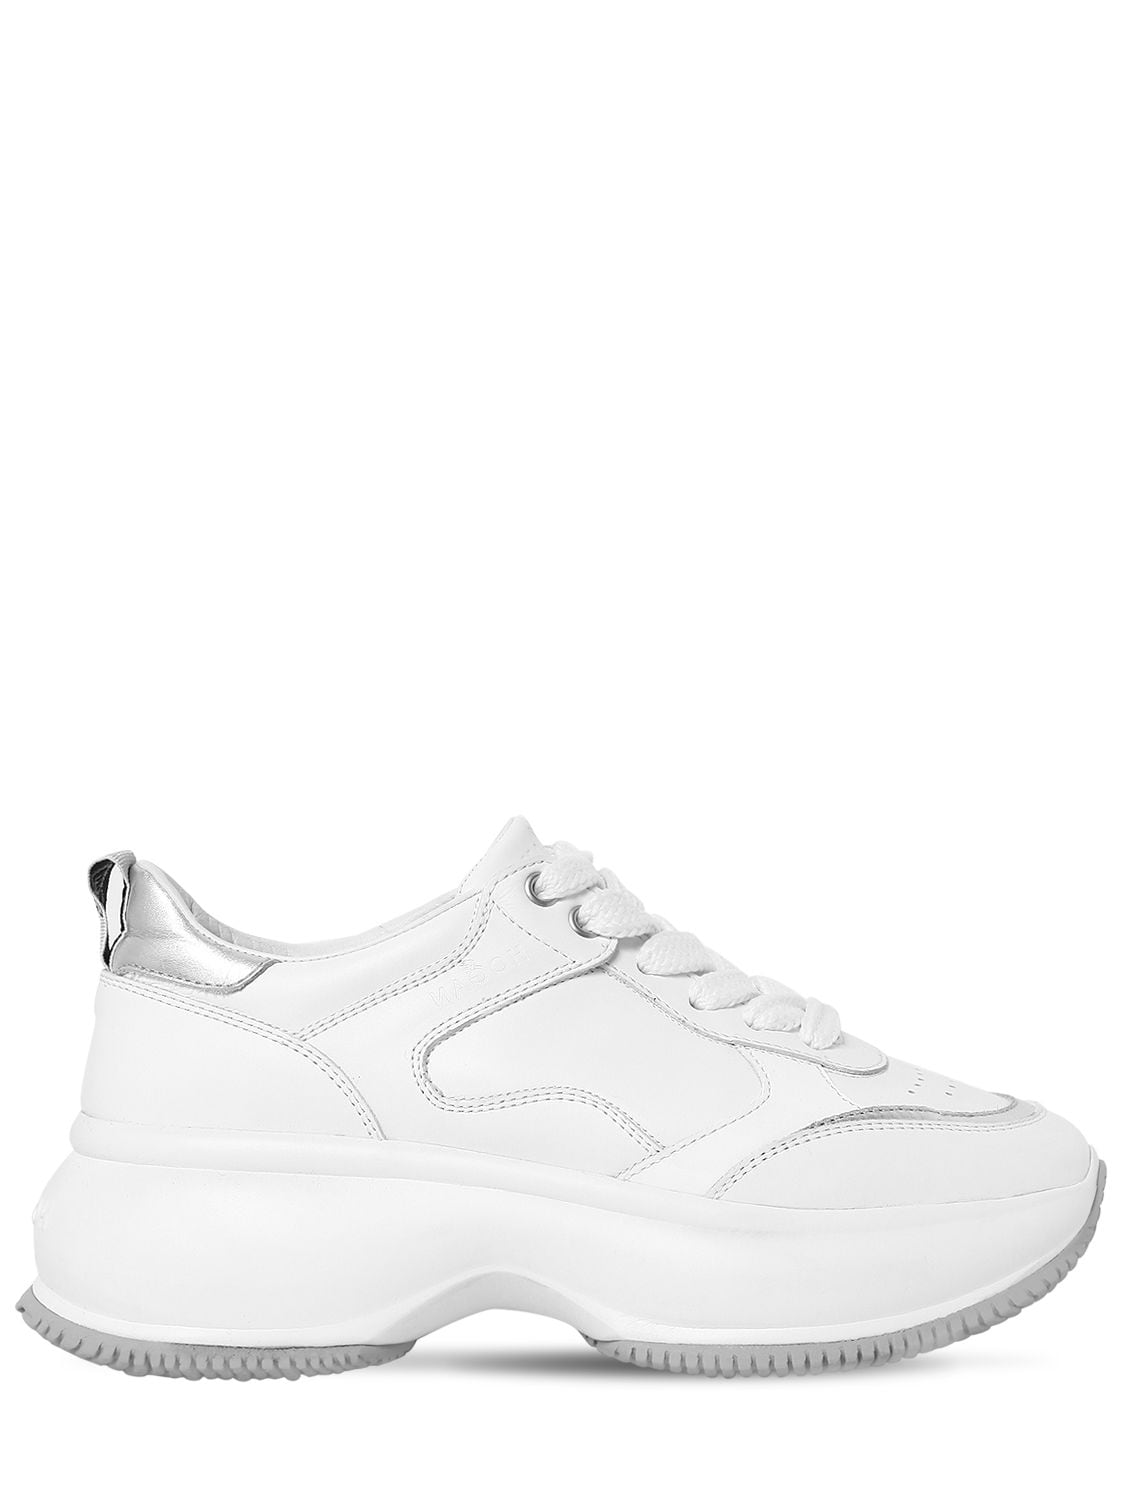 Hogan 40mm H435 New Iconic Leather Sneakers In White